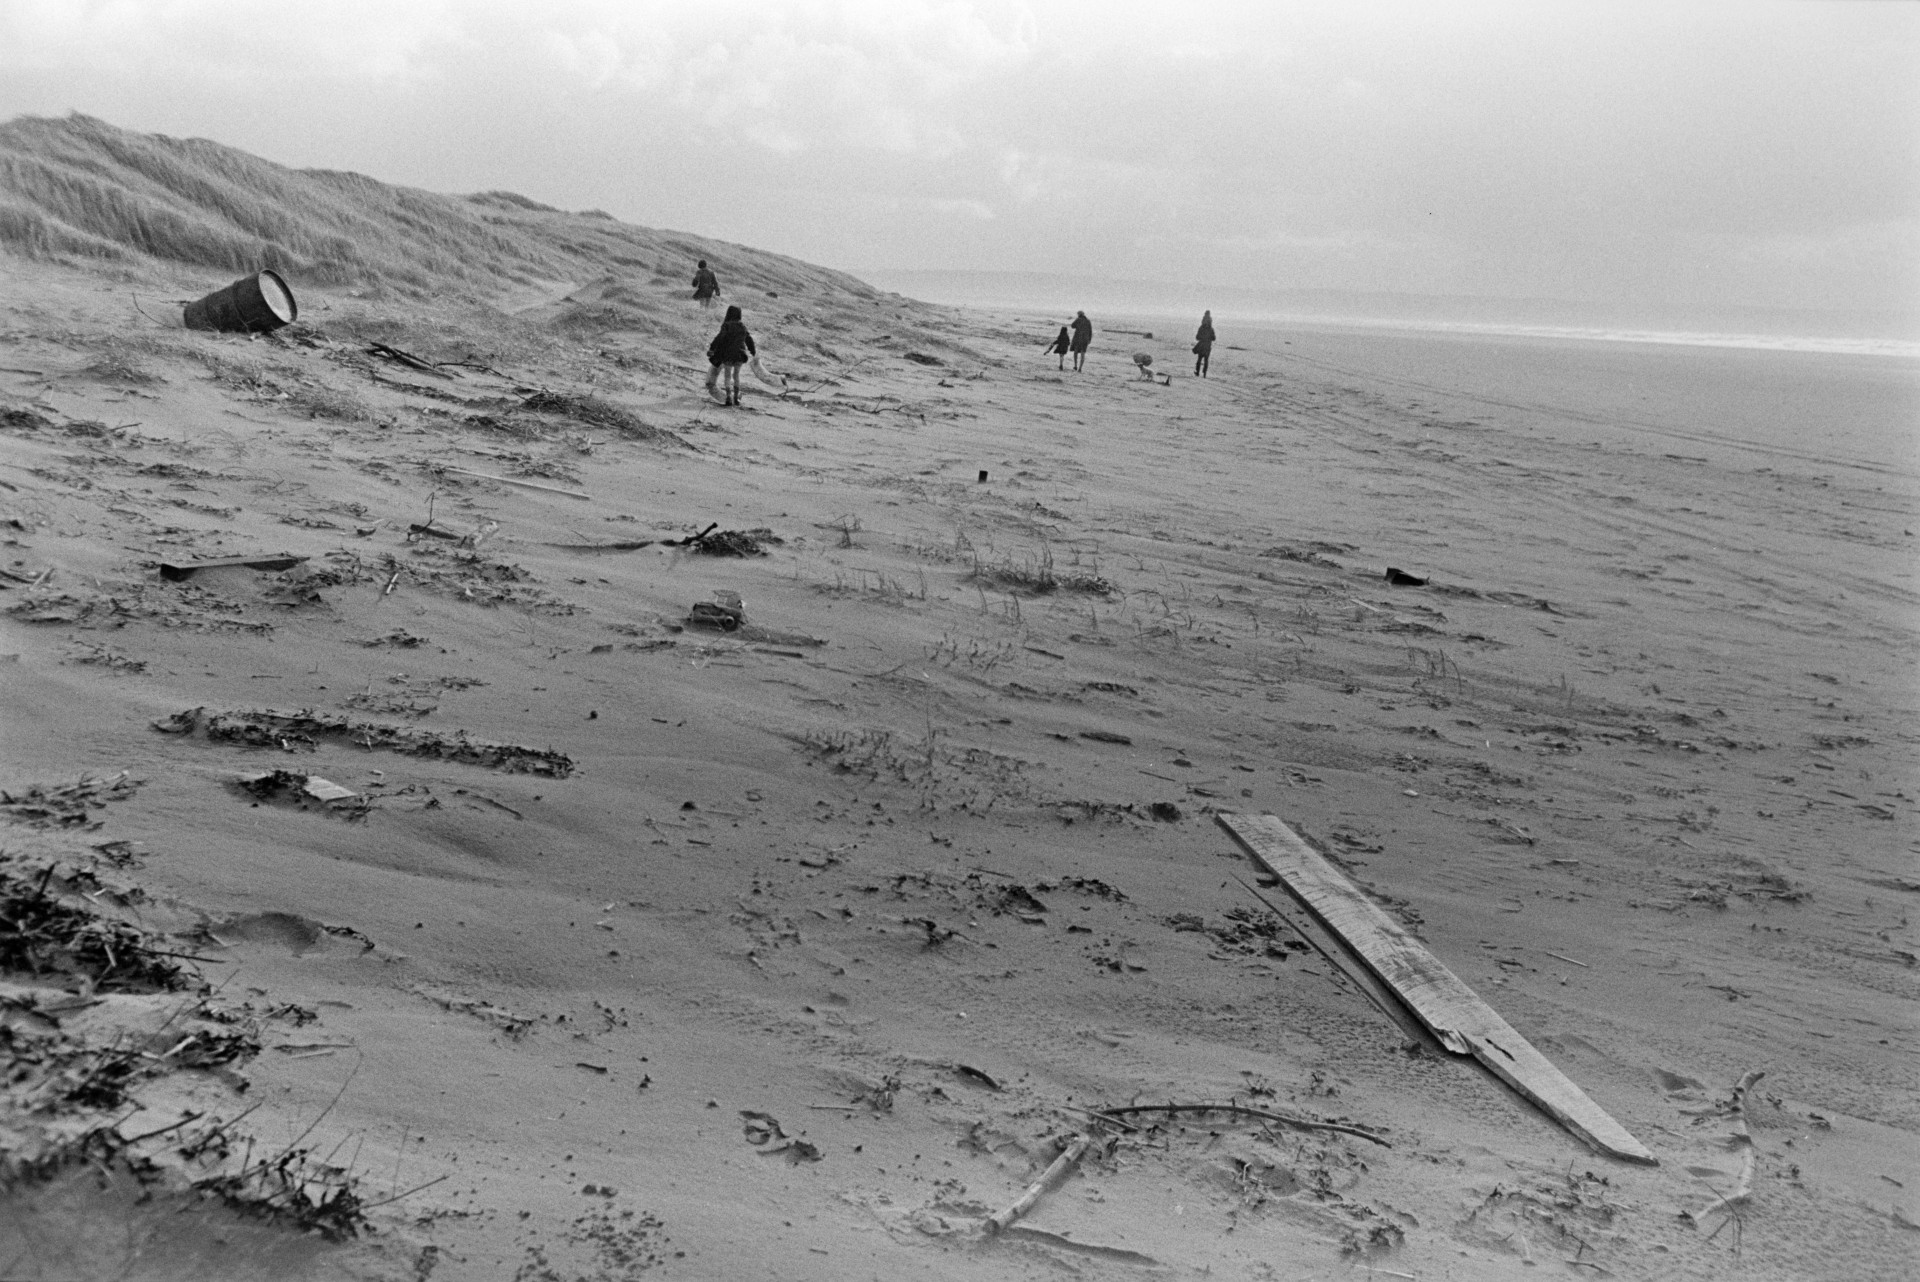 People walking along the beach at Saunton Sands, with sand dunes behind them. Debris is visible on the beach, including a barrel and a plank of wood.